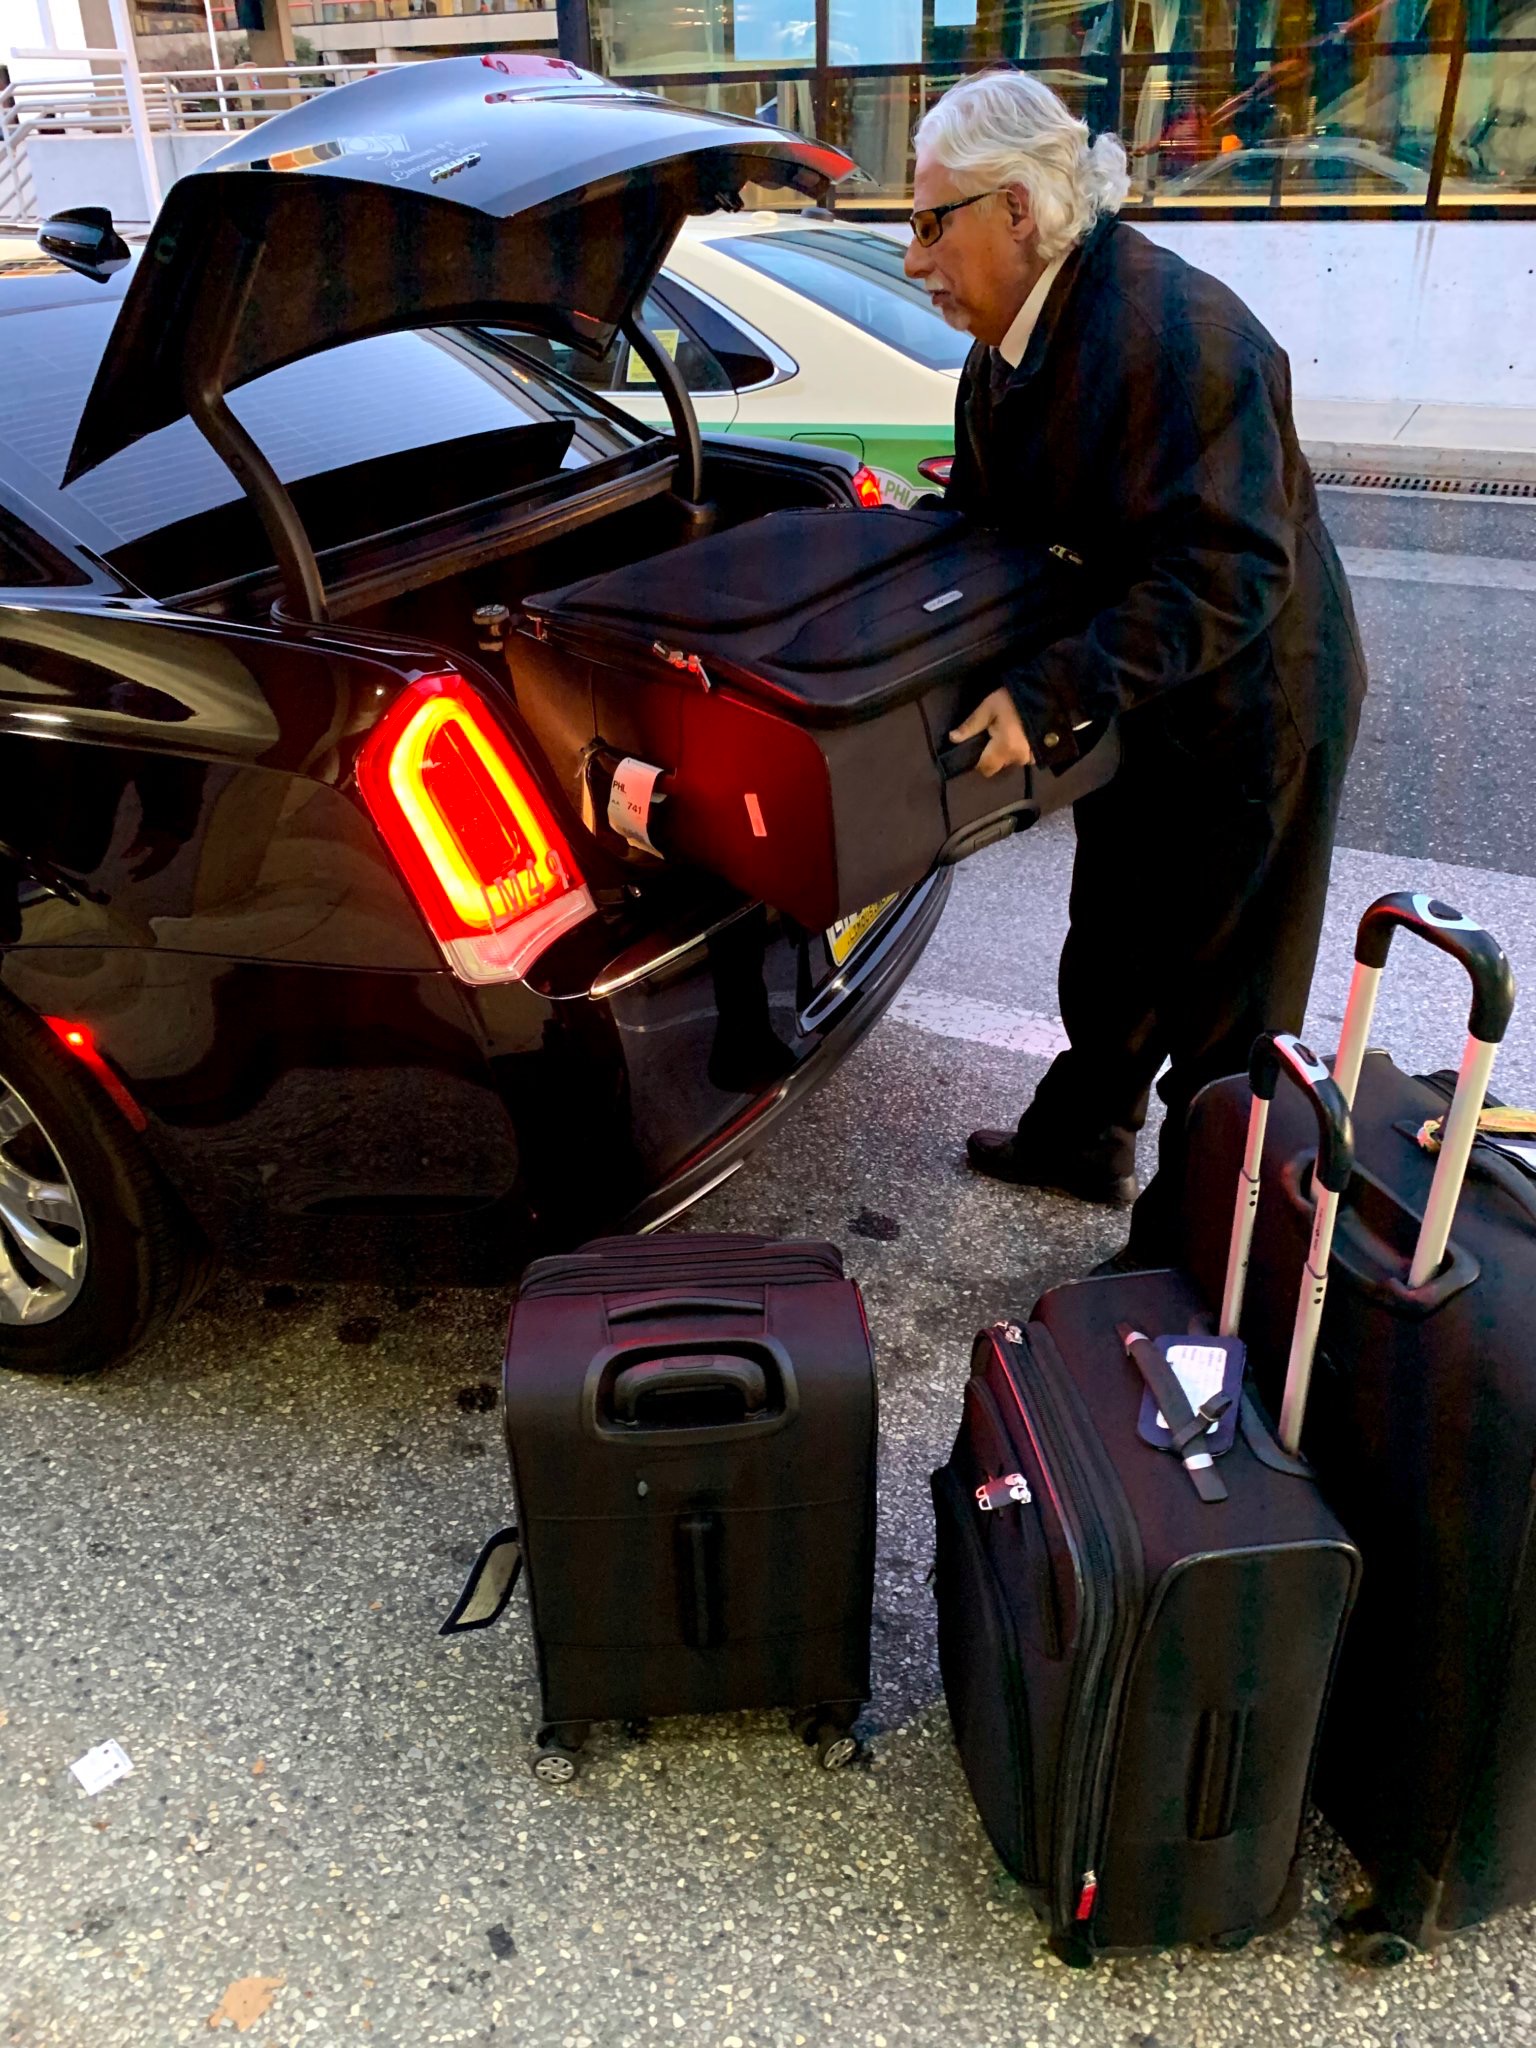 Premier Limousine Car Service loading our luggage at the Philly Airport